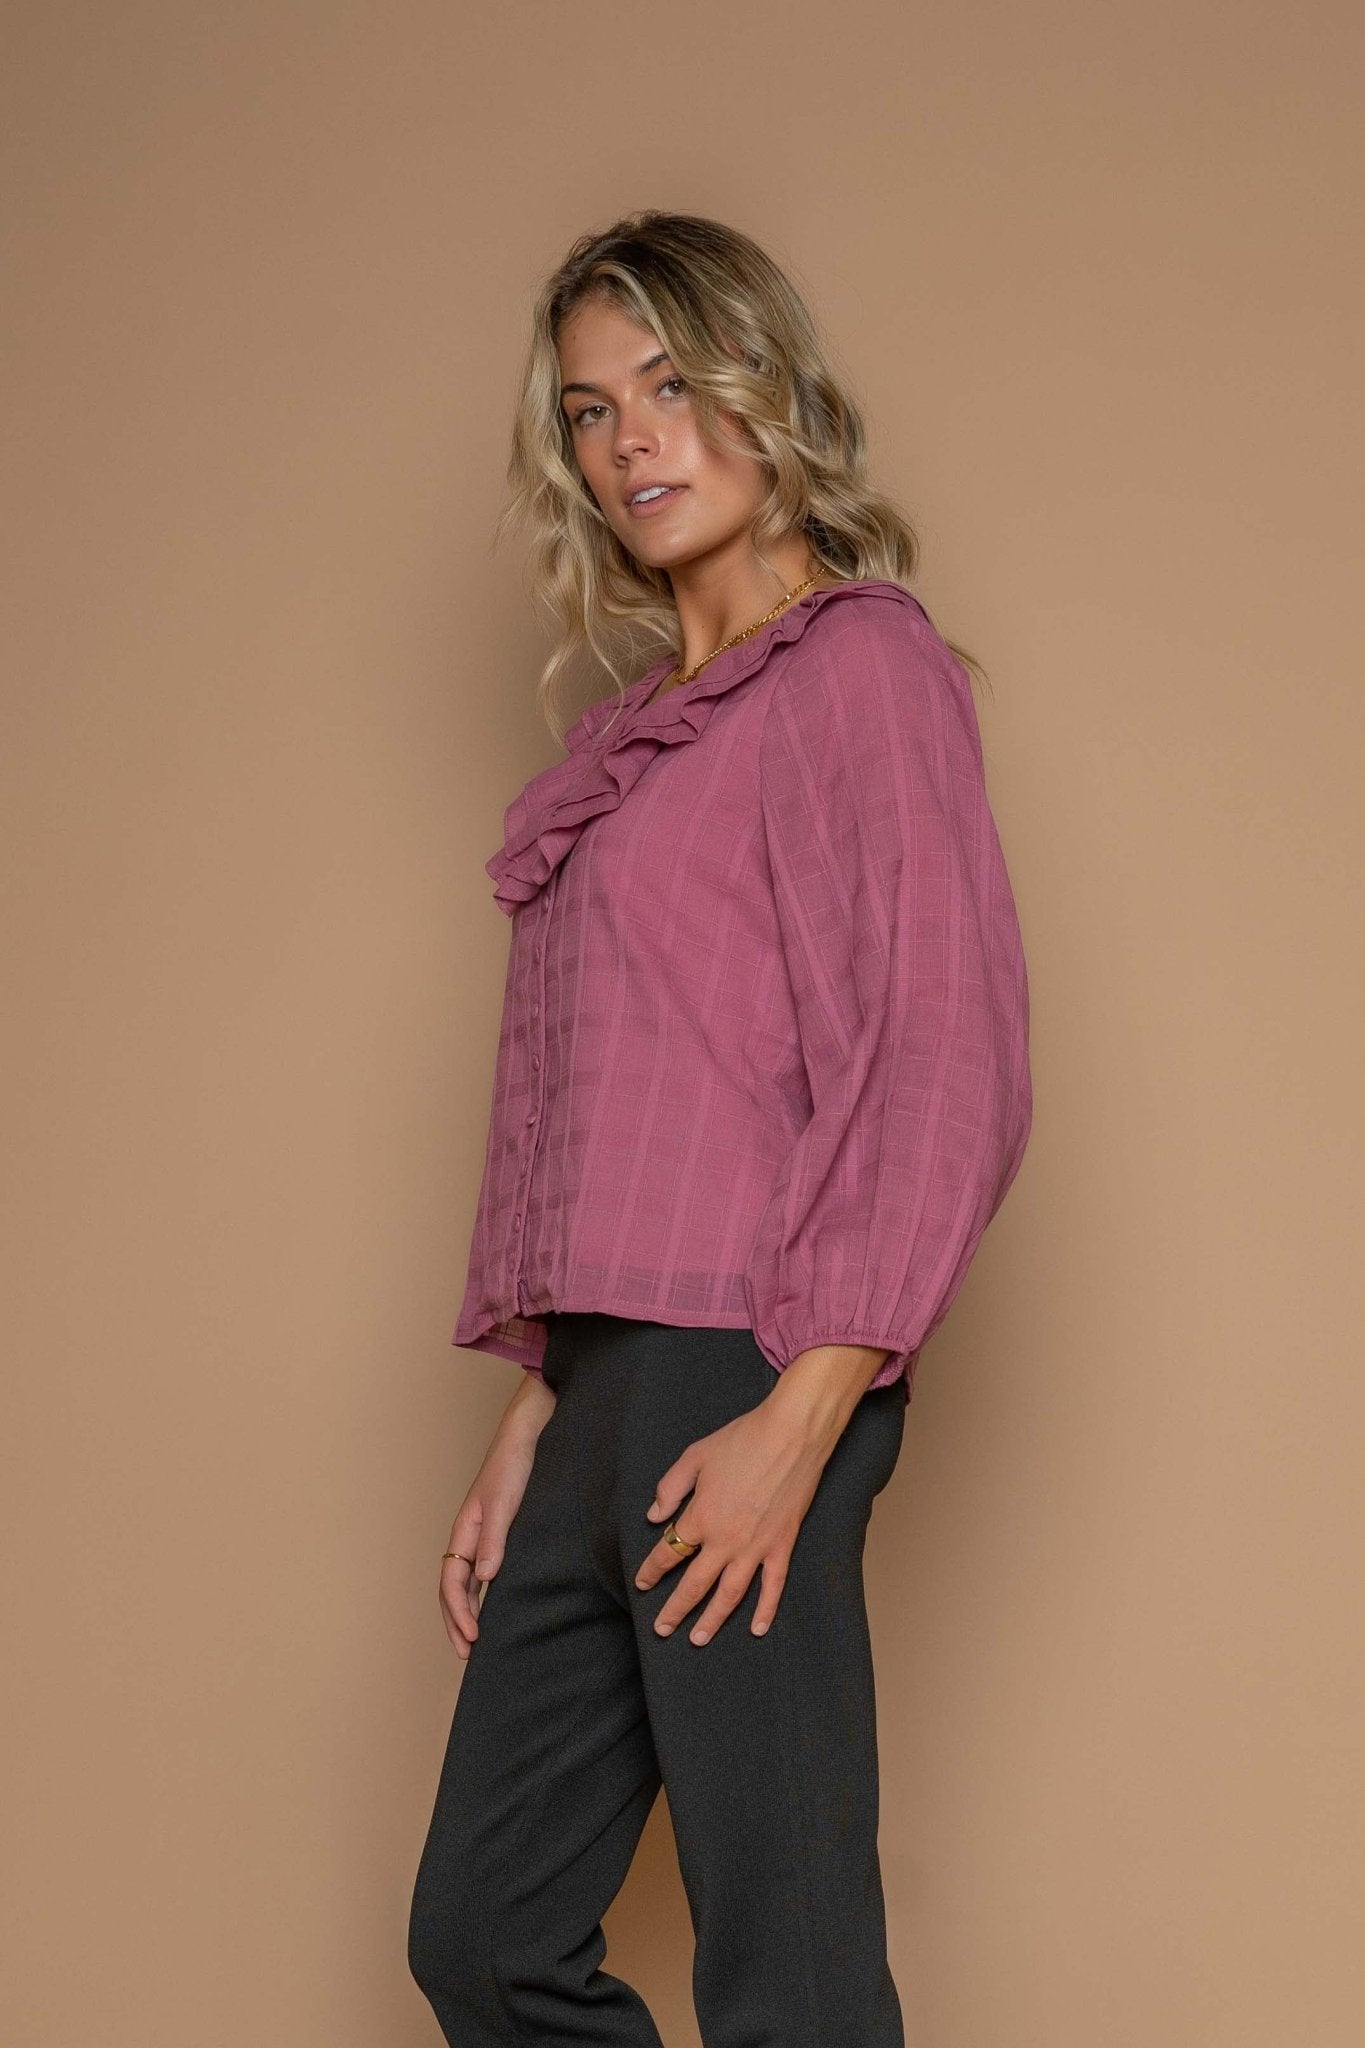 Silent Echo Avery Frill Neck Blouse in Rosewood - Hey Sara